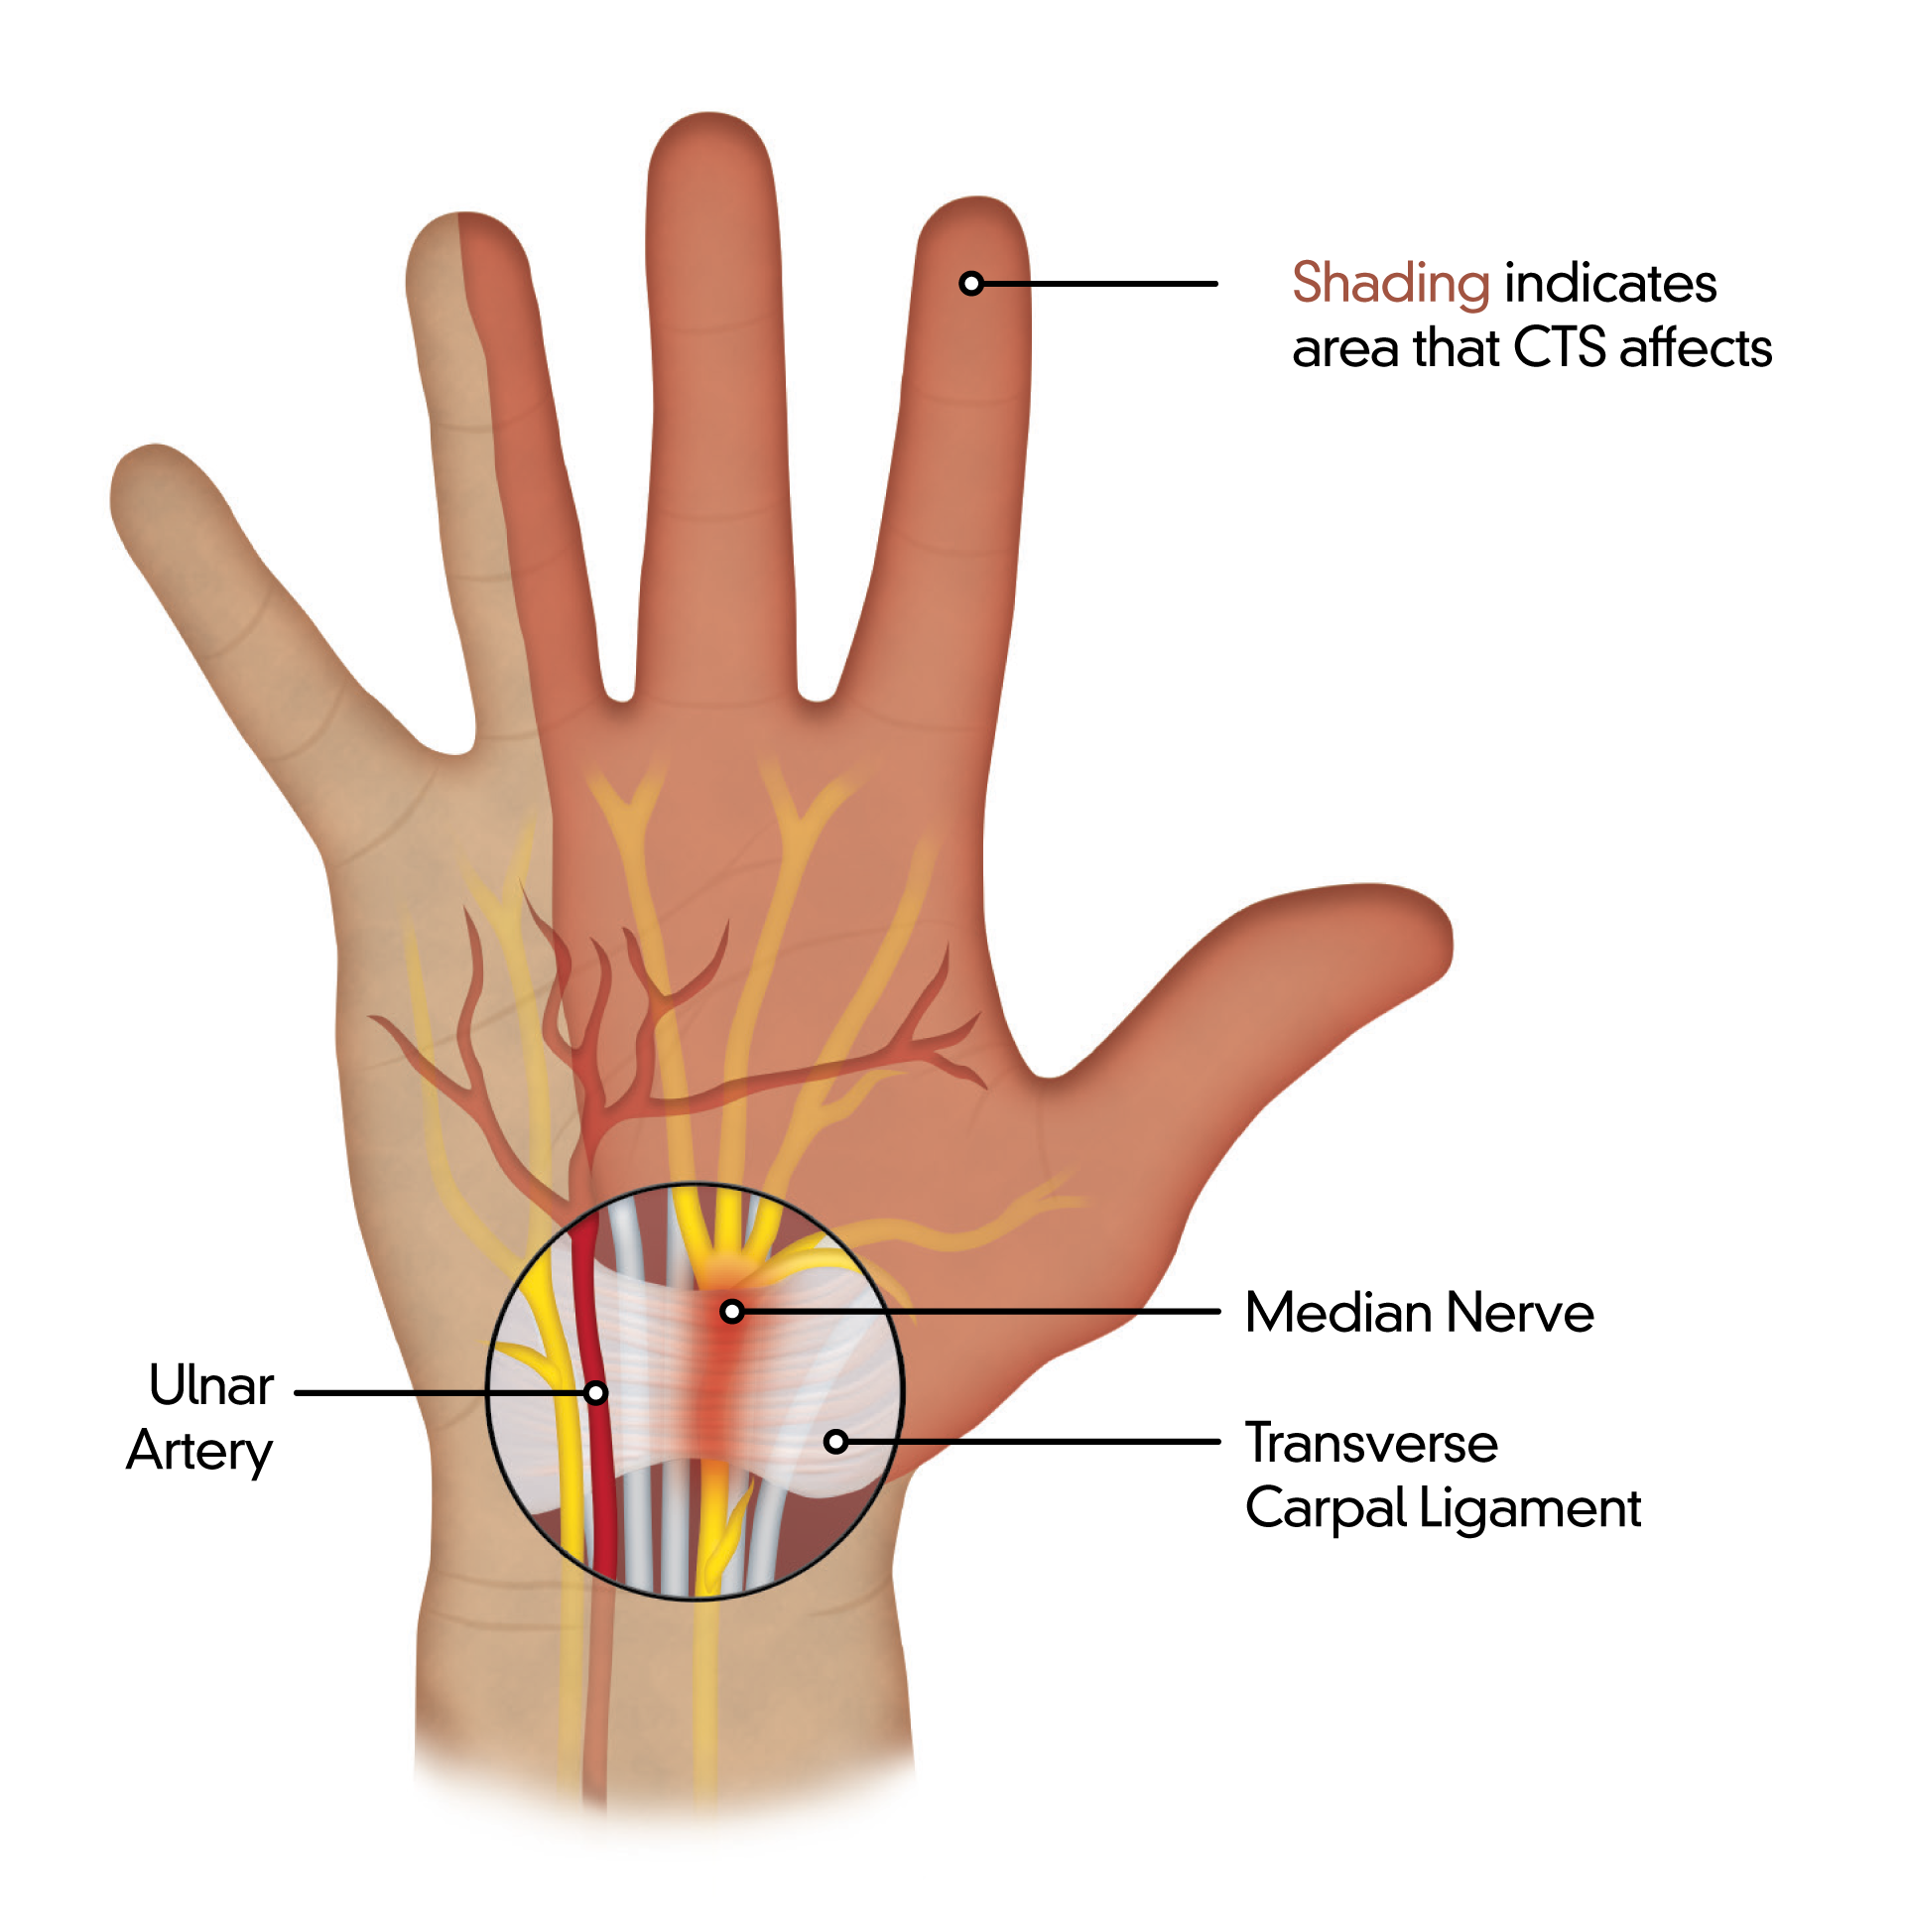 Left hand showing critical anatomy affected by carpal tunnel syndrome highlighting ulnar artery, median nerve, transverse carpal ligament.